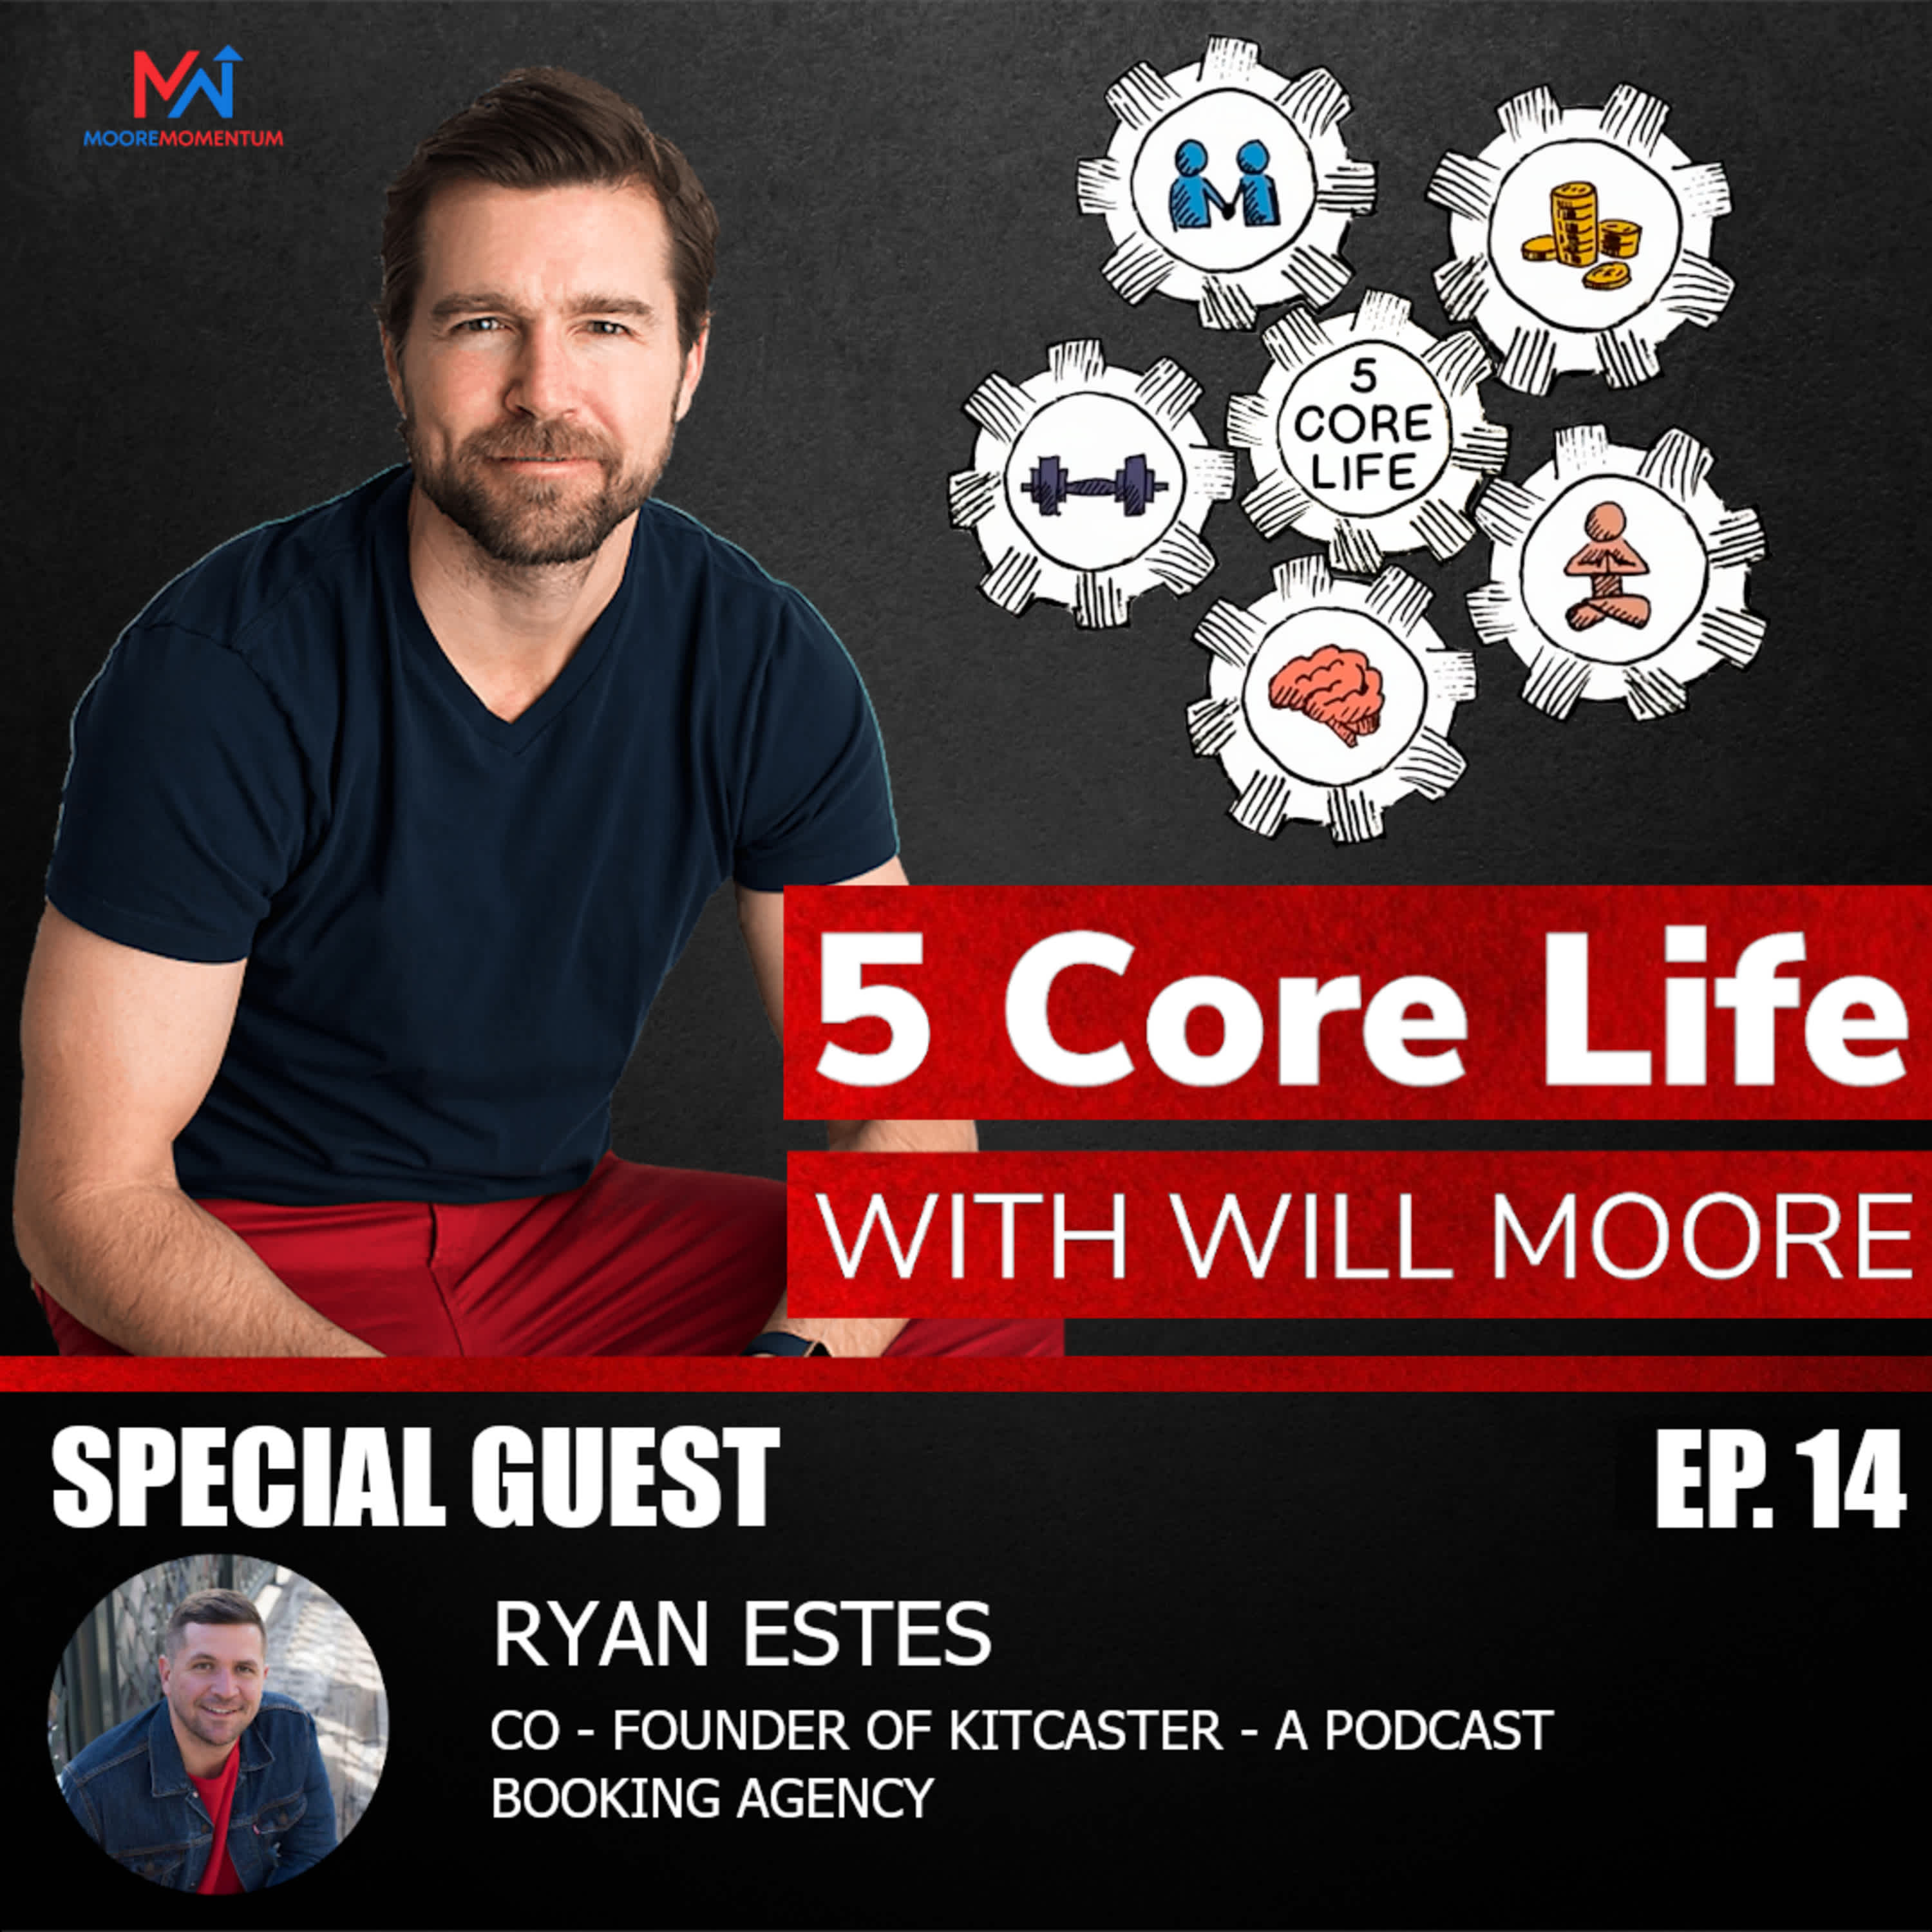 Have You Used This Time To Reflect On Your Habits & What Makes You Happy? Sit Down with Will and Special Guest Ryan Estes To Discuss Finding Peace In Solitude